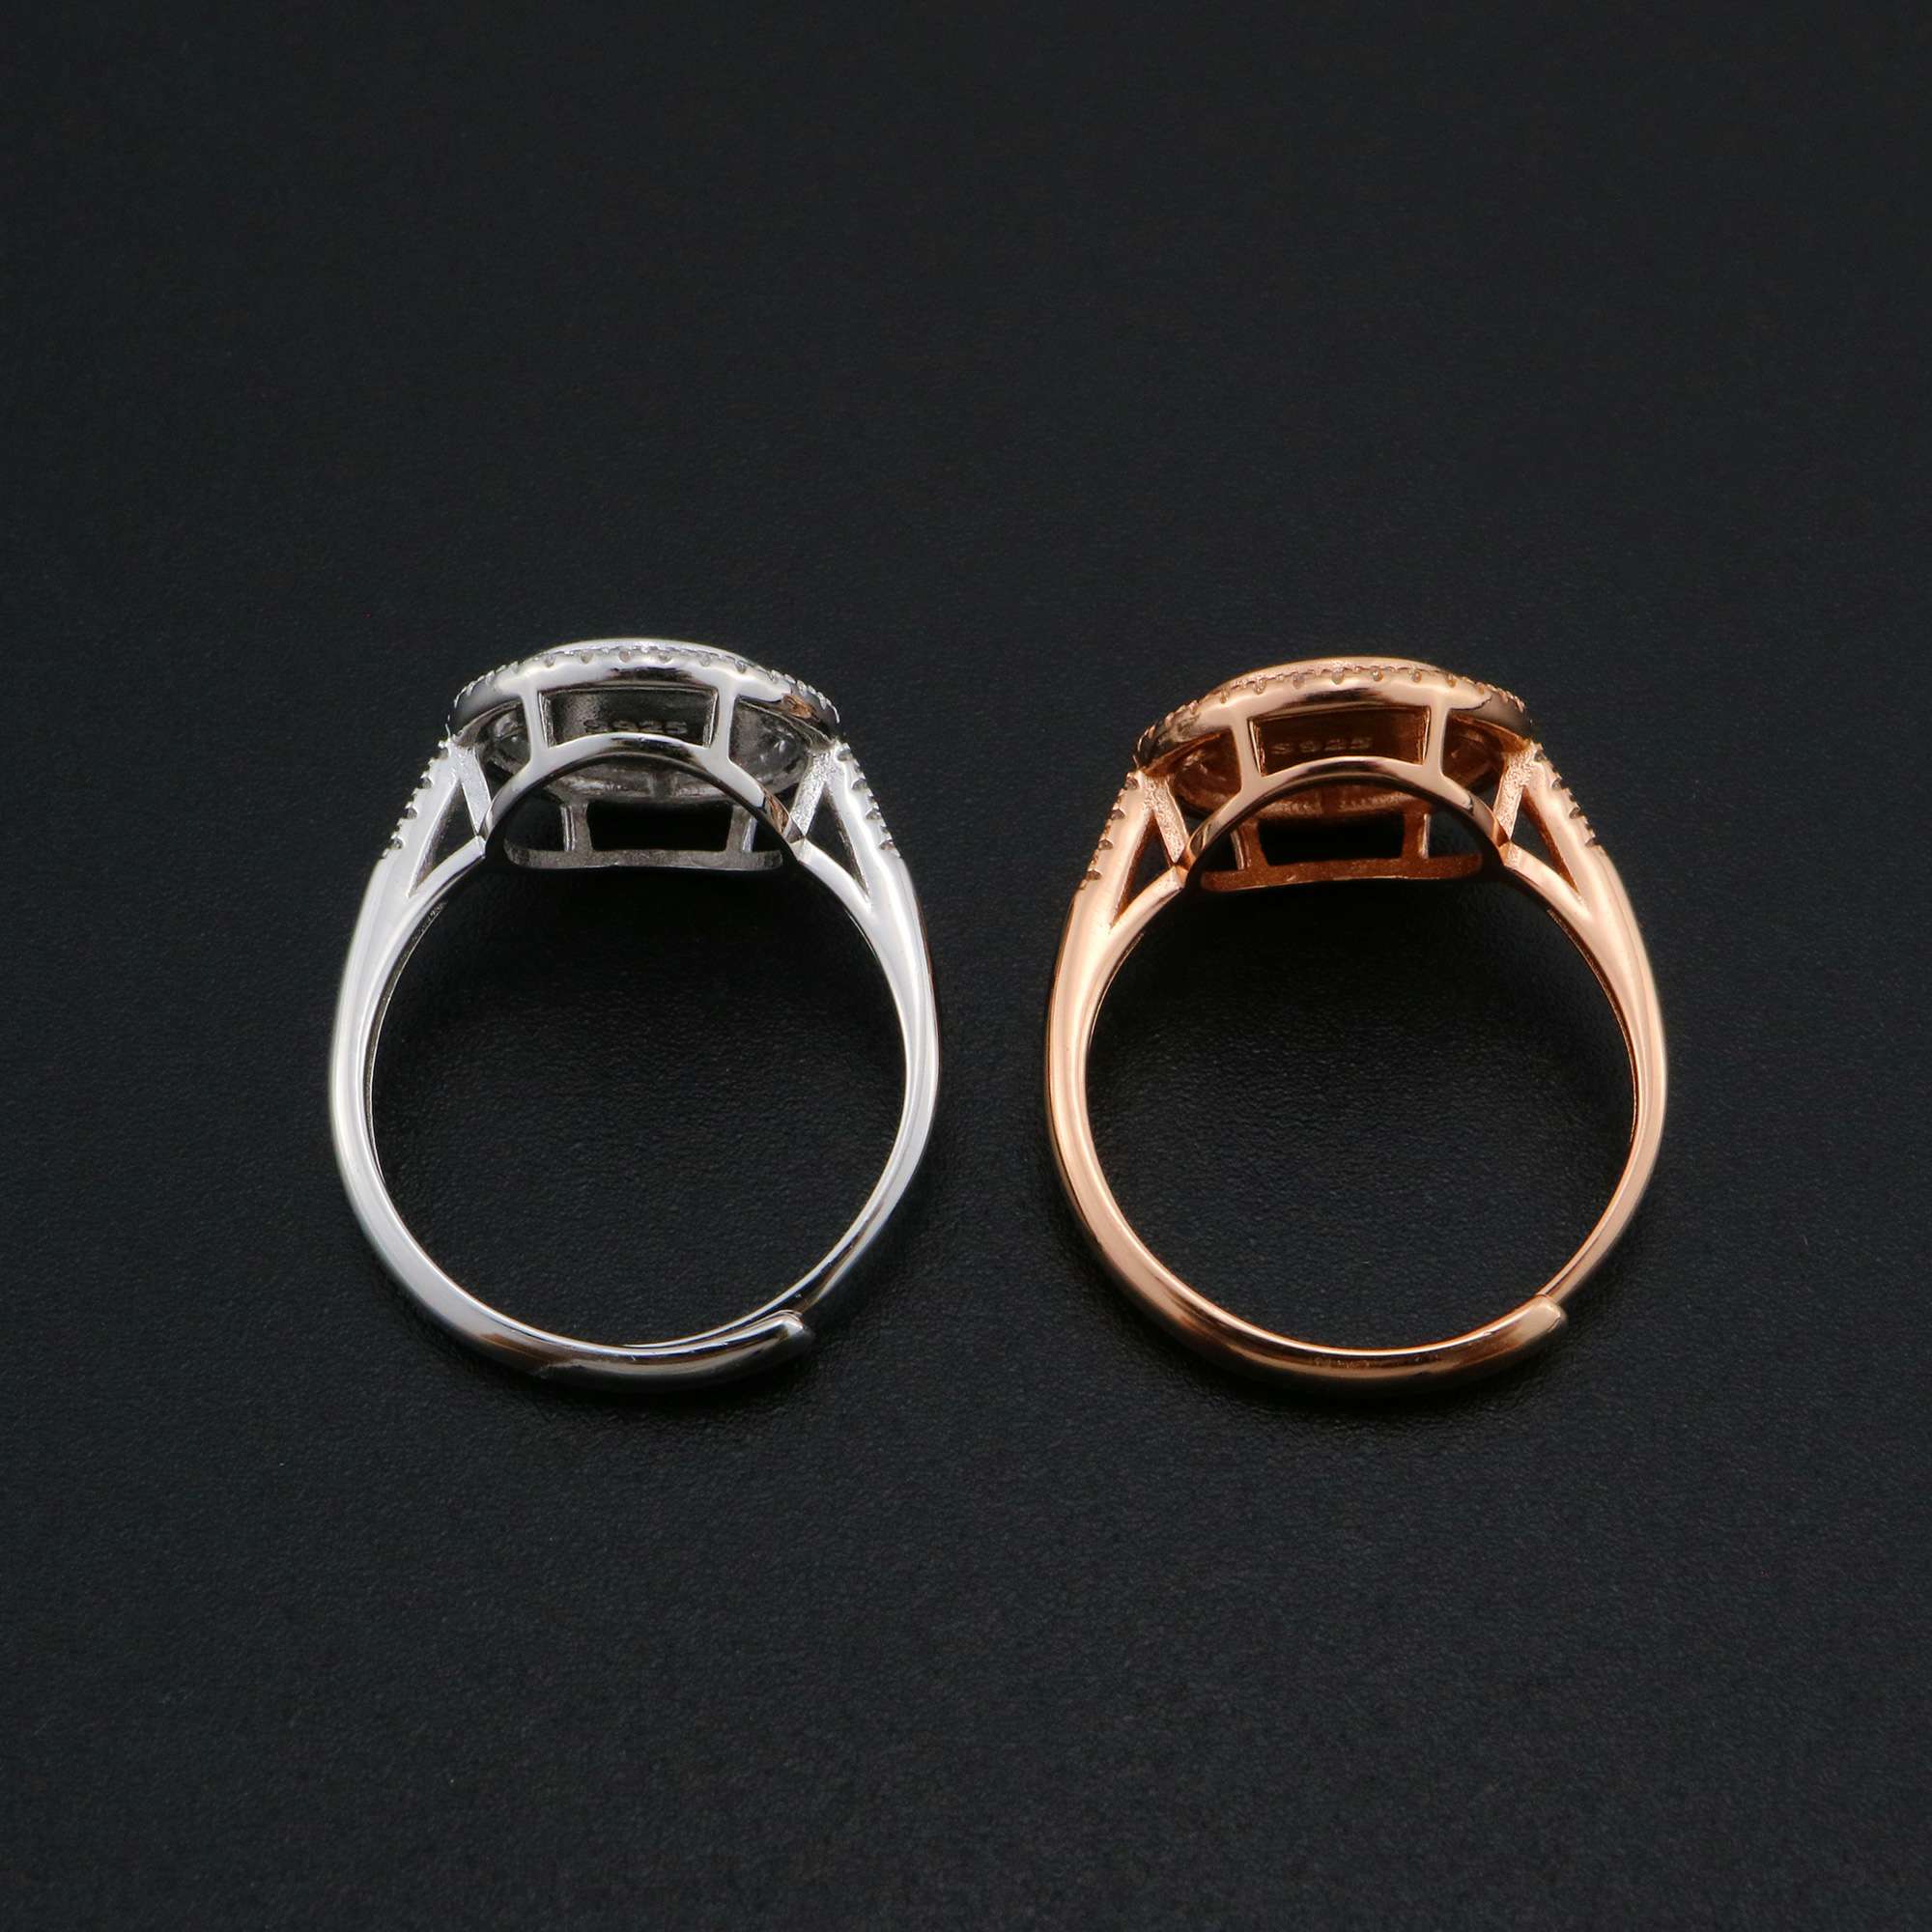 Keepsake Breast Milk Resin Ring Settings Round Solid Back 925 Sterling Silver Rose Gold Plated 8MM Halo CZ Stone Ring Bezel 1210092 - Click Image to Close